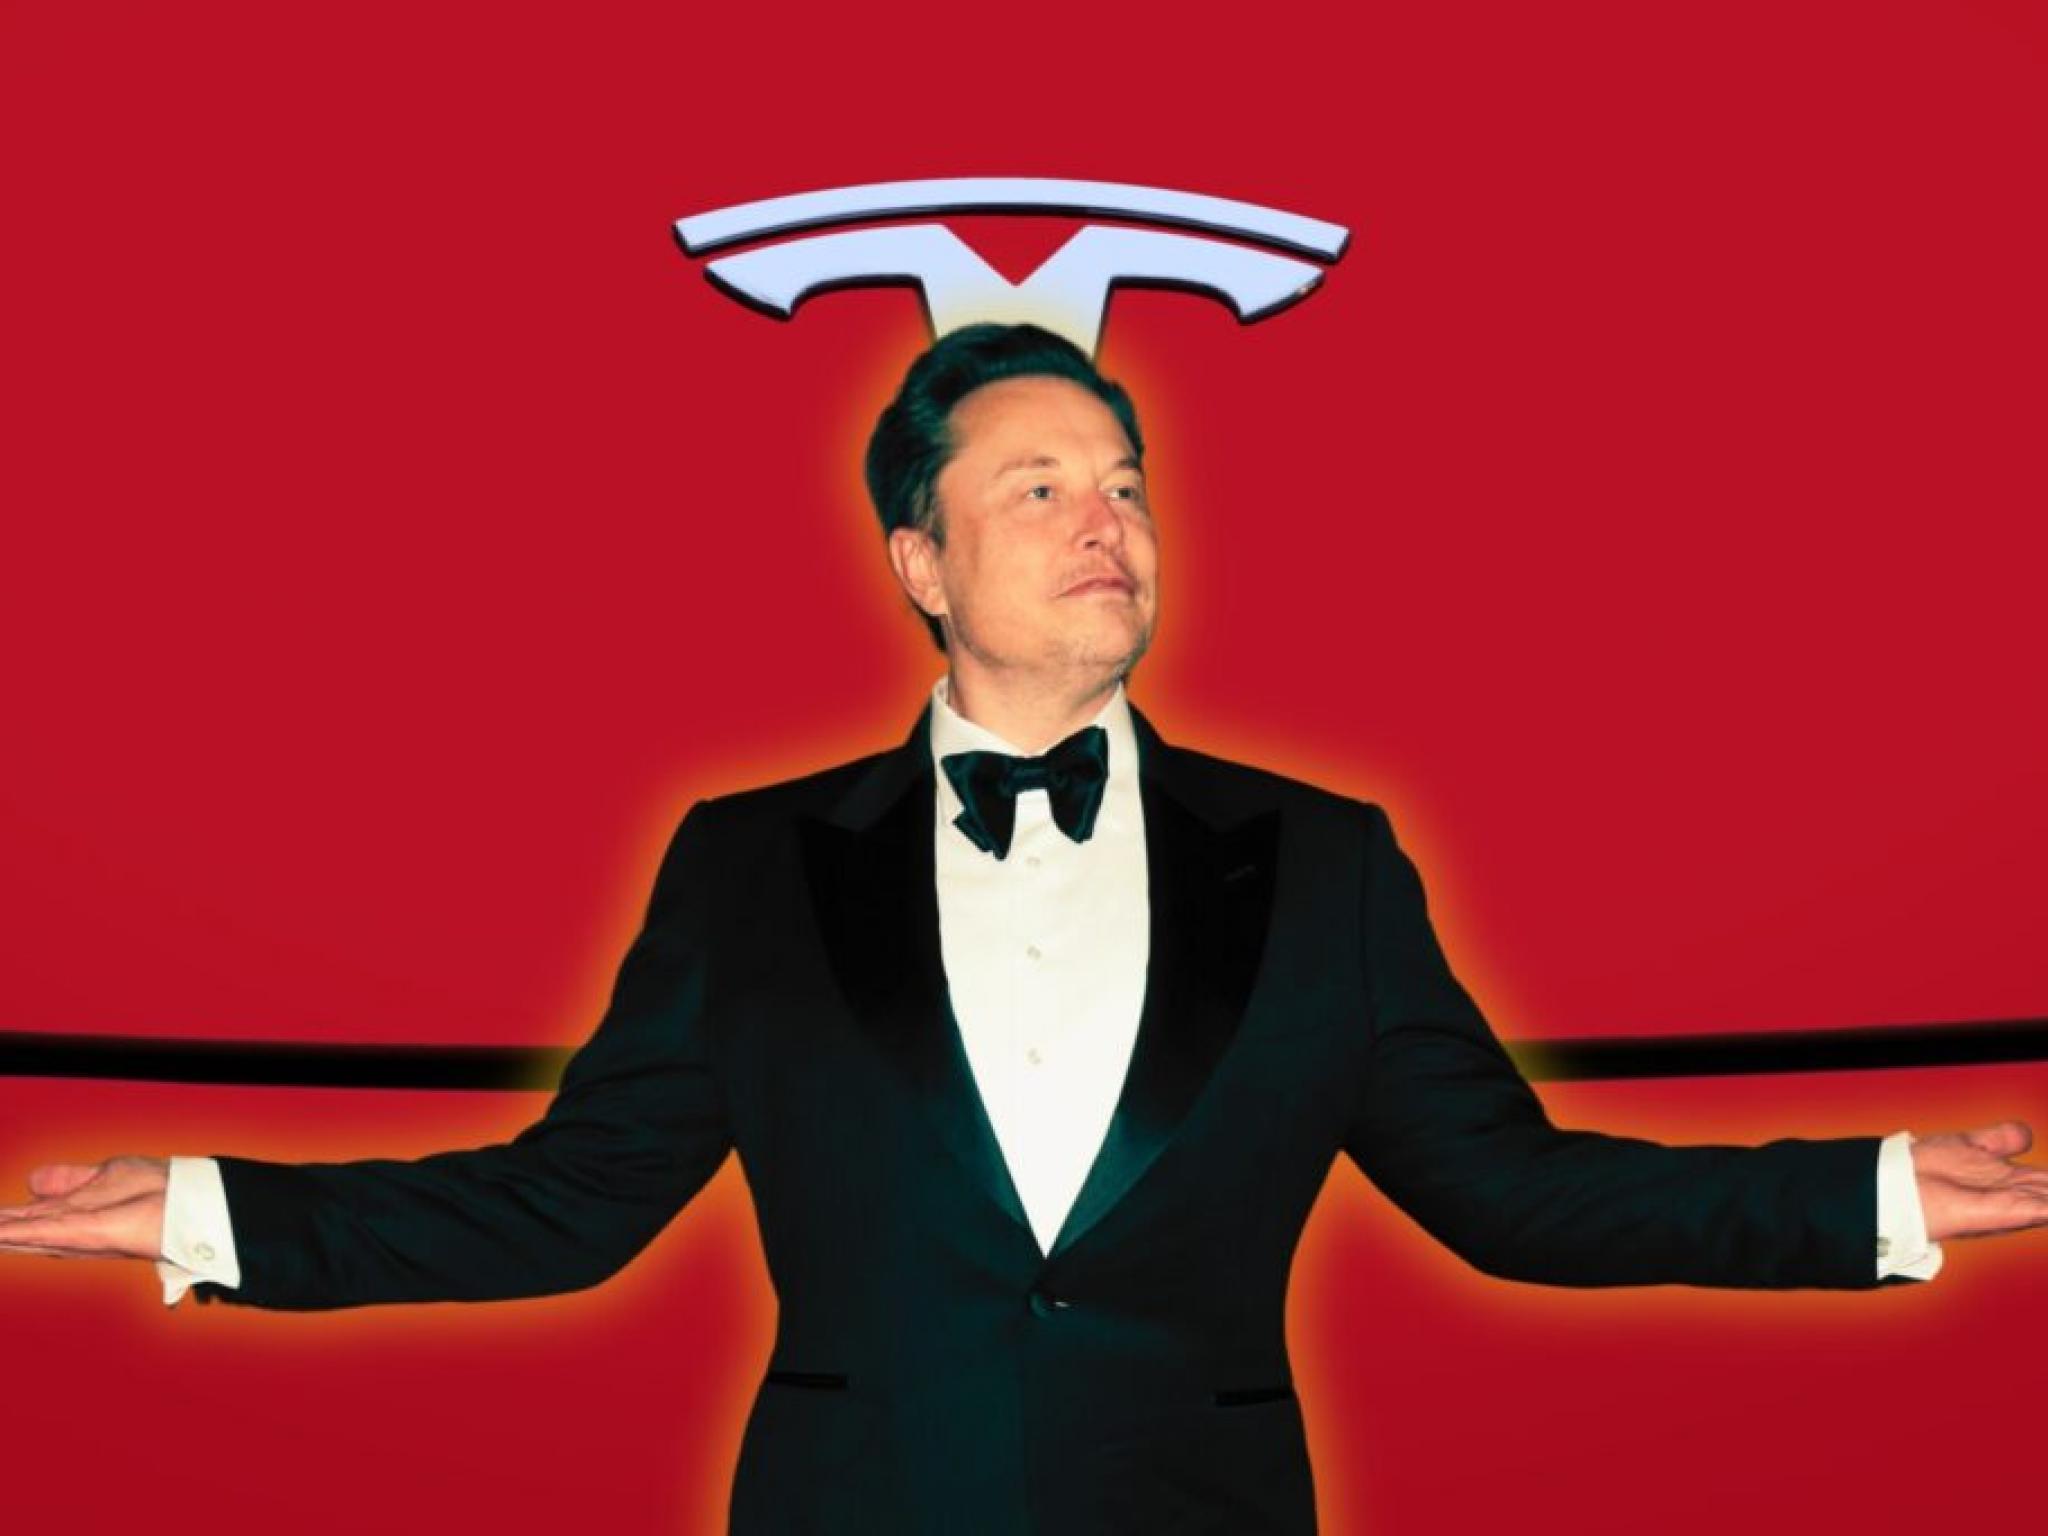  tesla-has-the-endorsement-of-xi-jinpings-government-this-is-what-serious-elon-musk-showed-to-investors-in-china-says-expert 